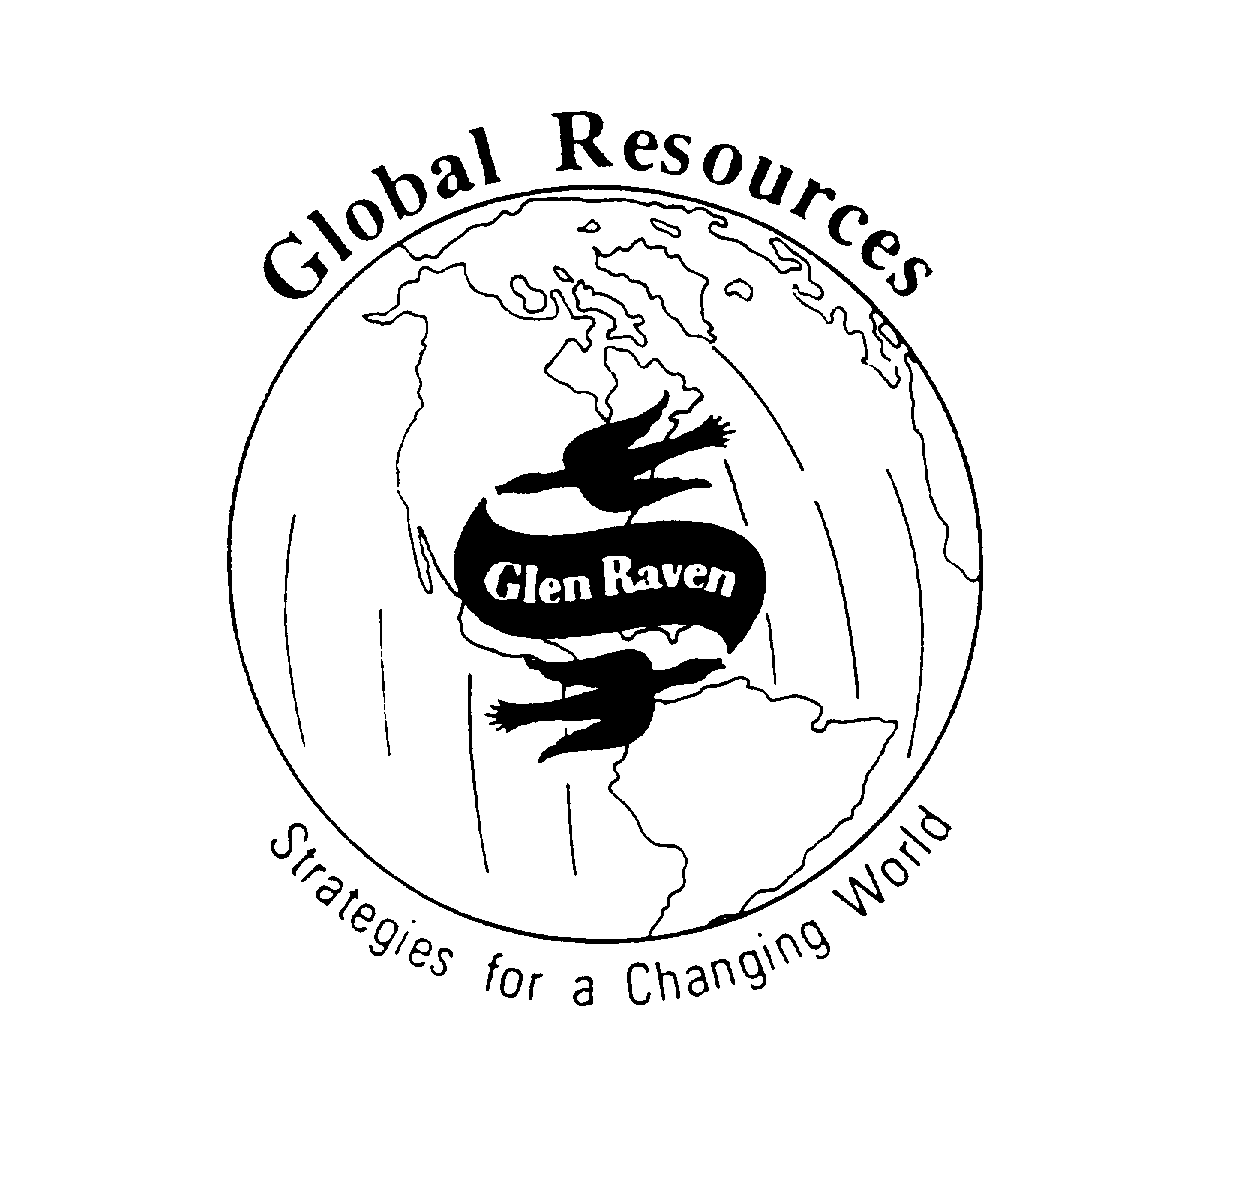  GLOBAL RESOURCES GLEN RAVEN STRATEGIES FOR A CHANGING WORLD